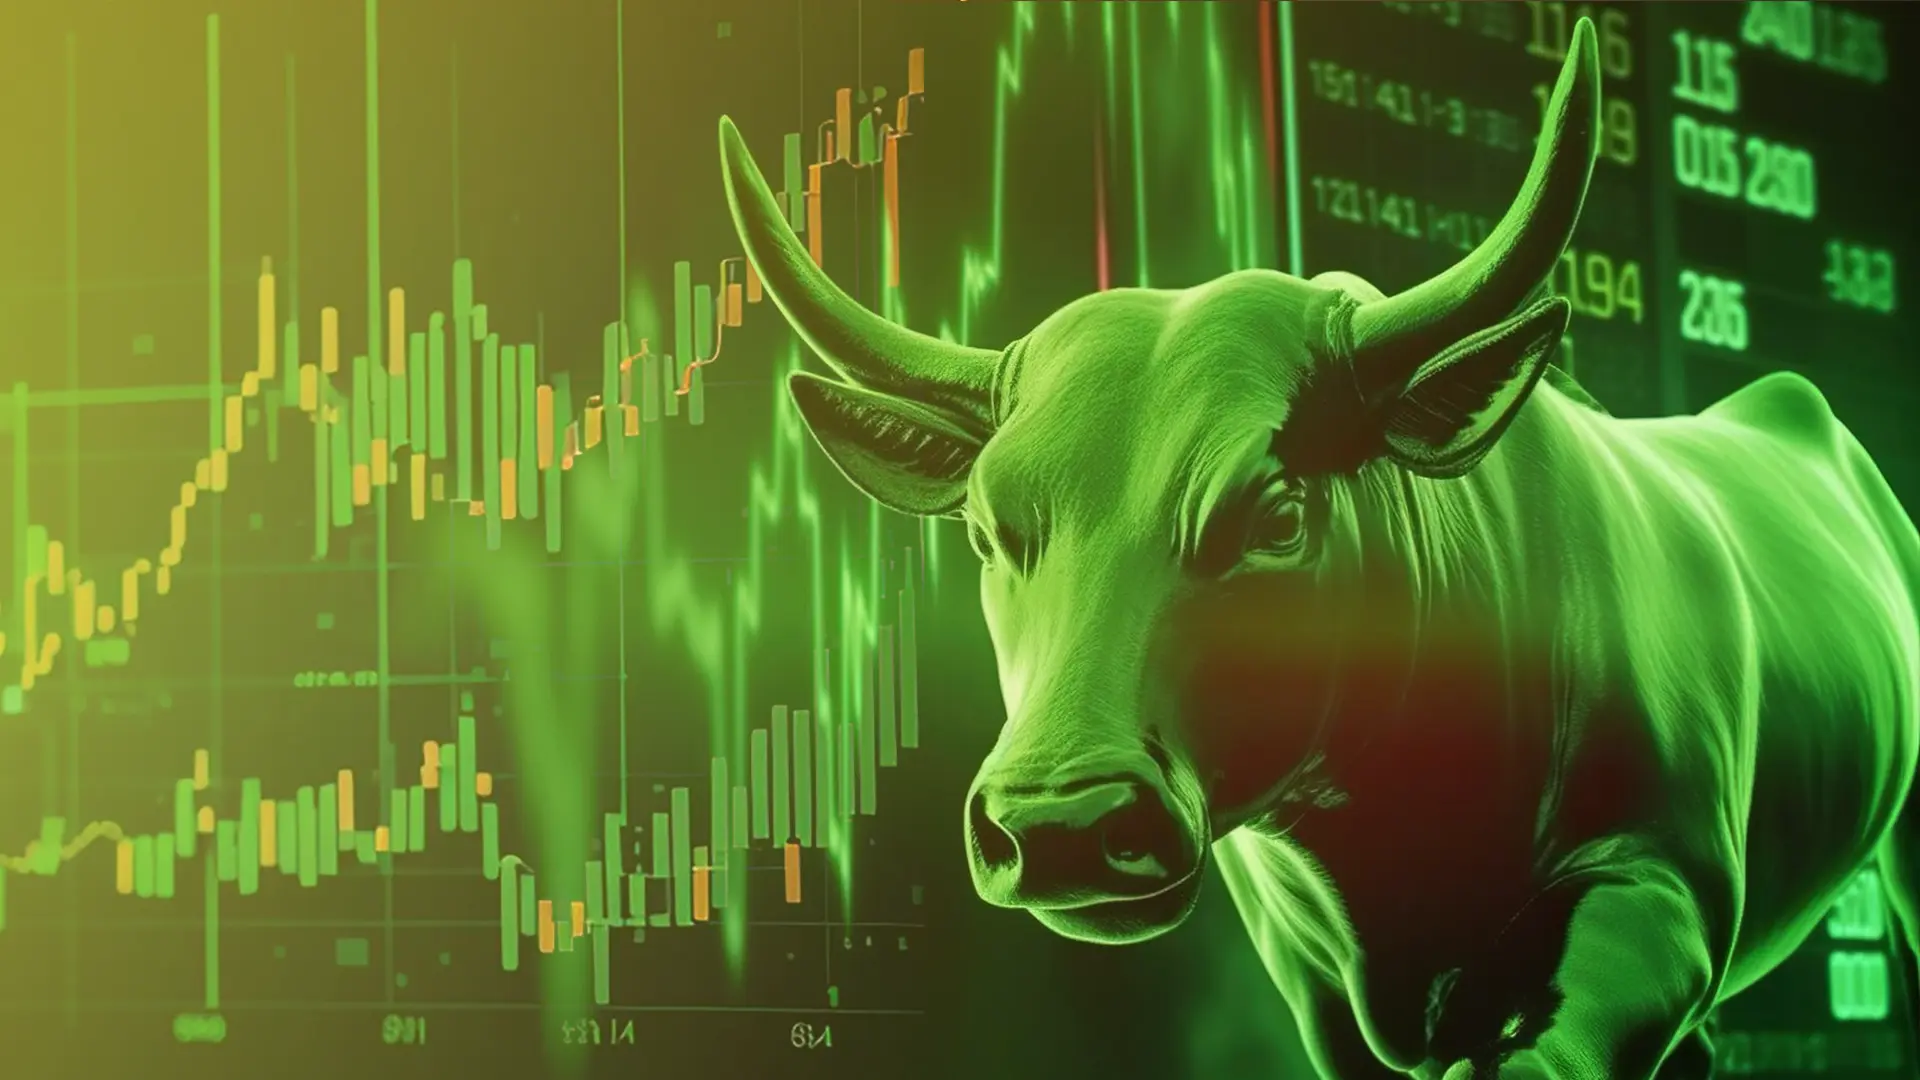 How a Crypto Bull Market May Play Out, According to Top YouTuber